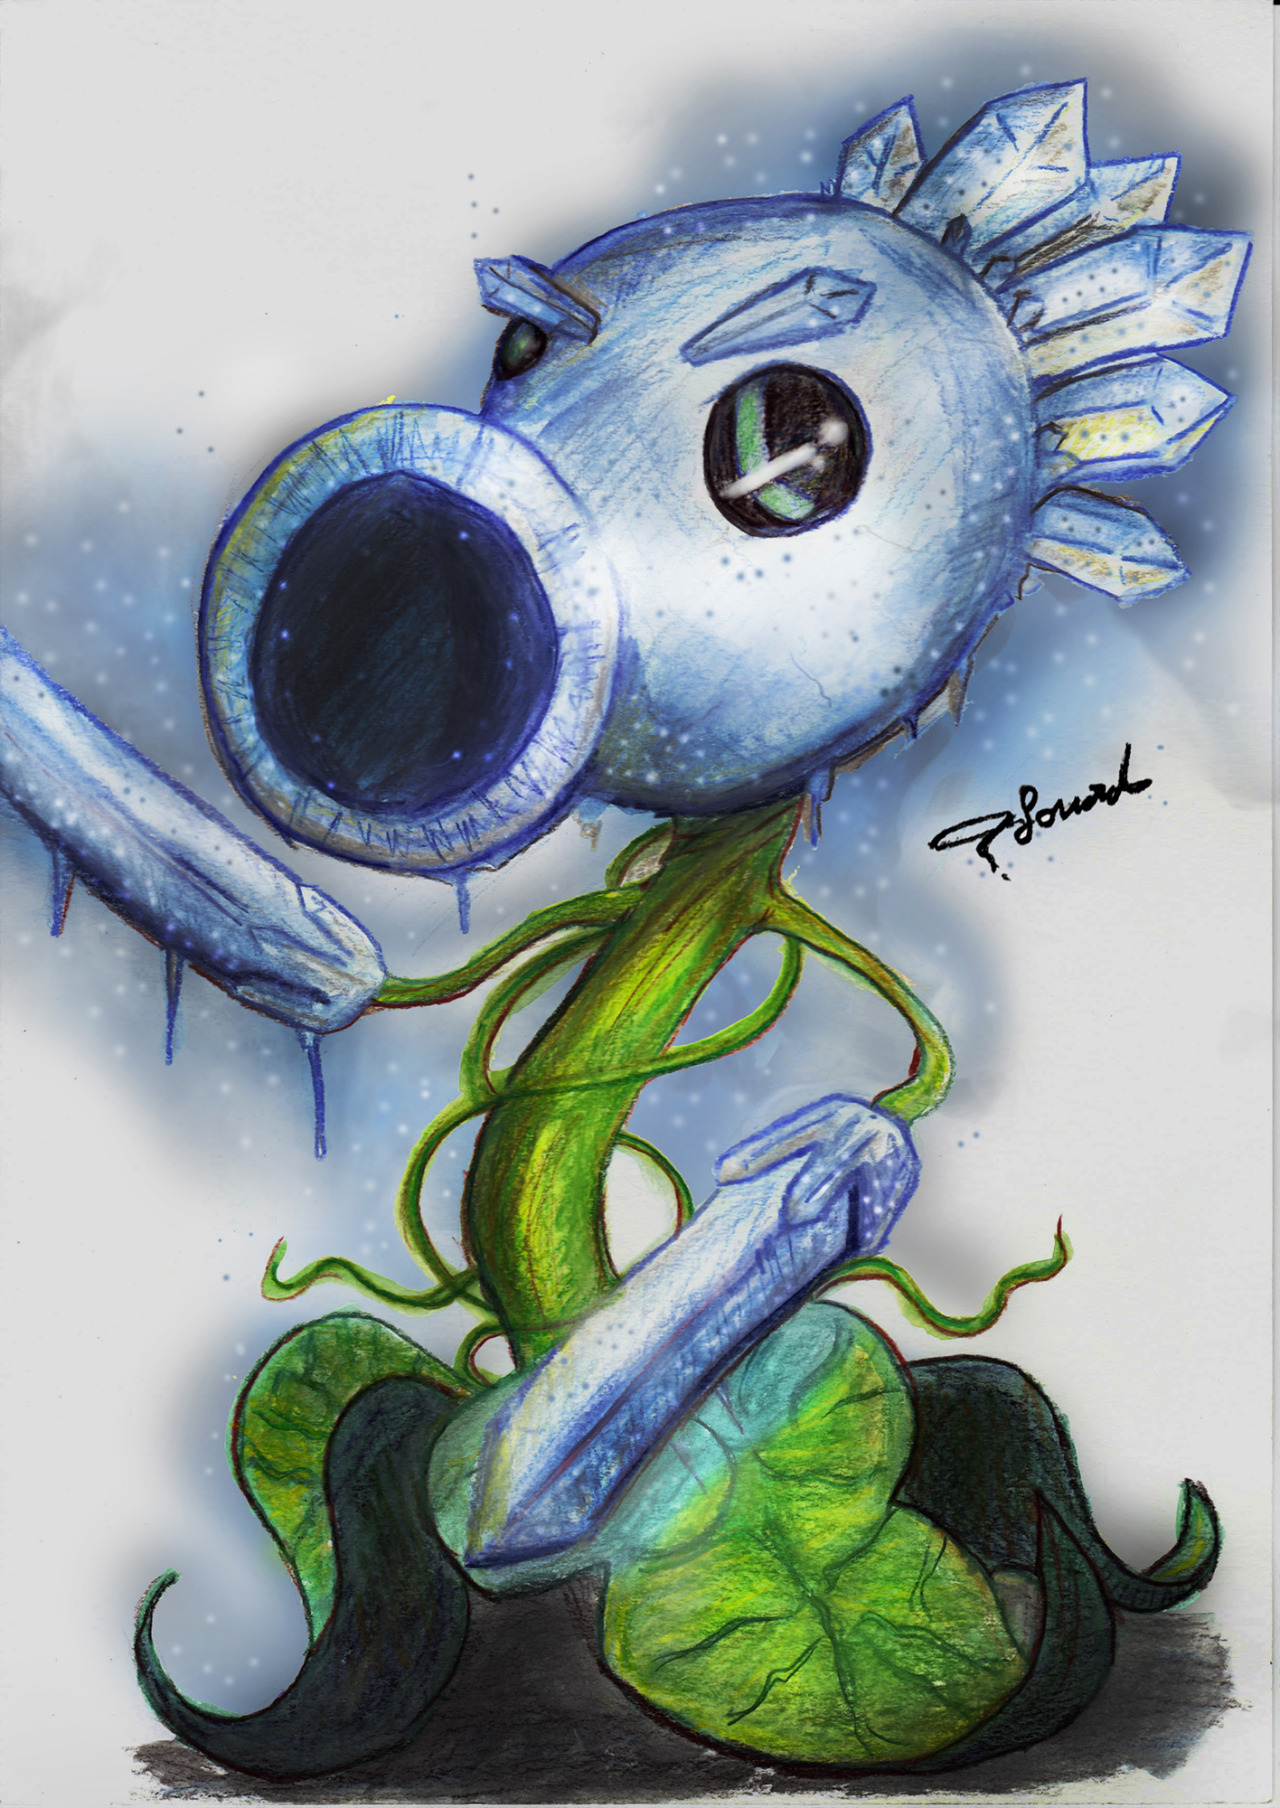 Fouad By Me Ice Peashooter From Plants Vs Zombies